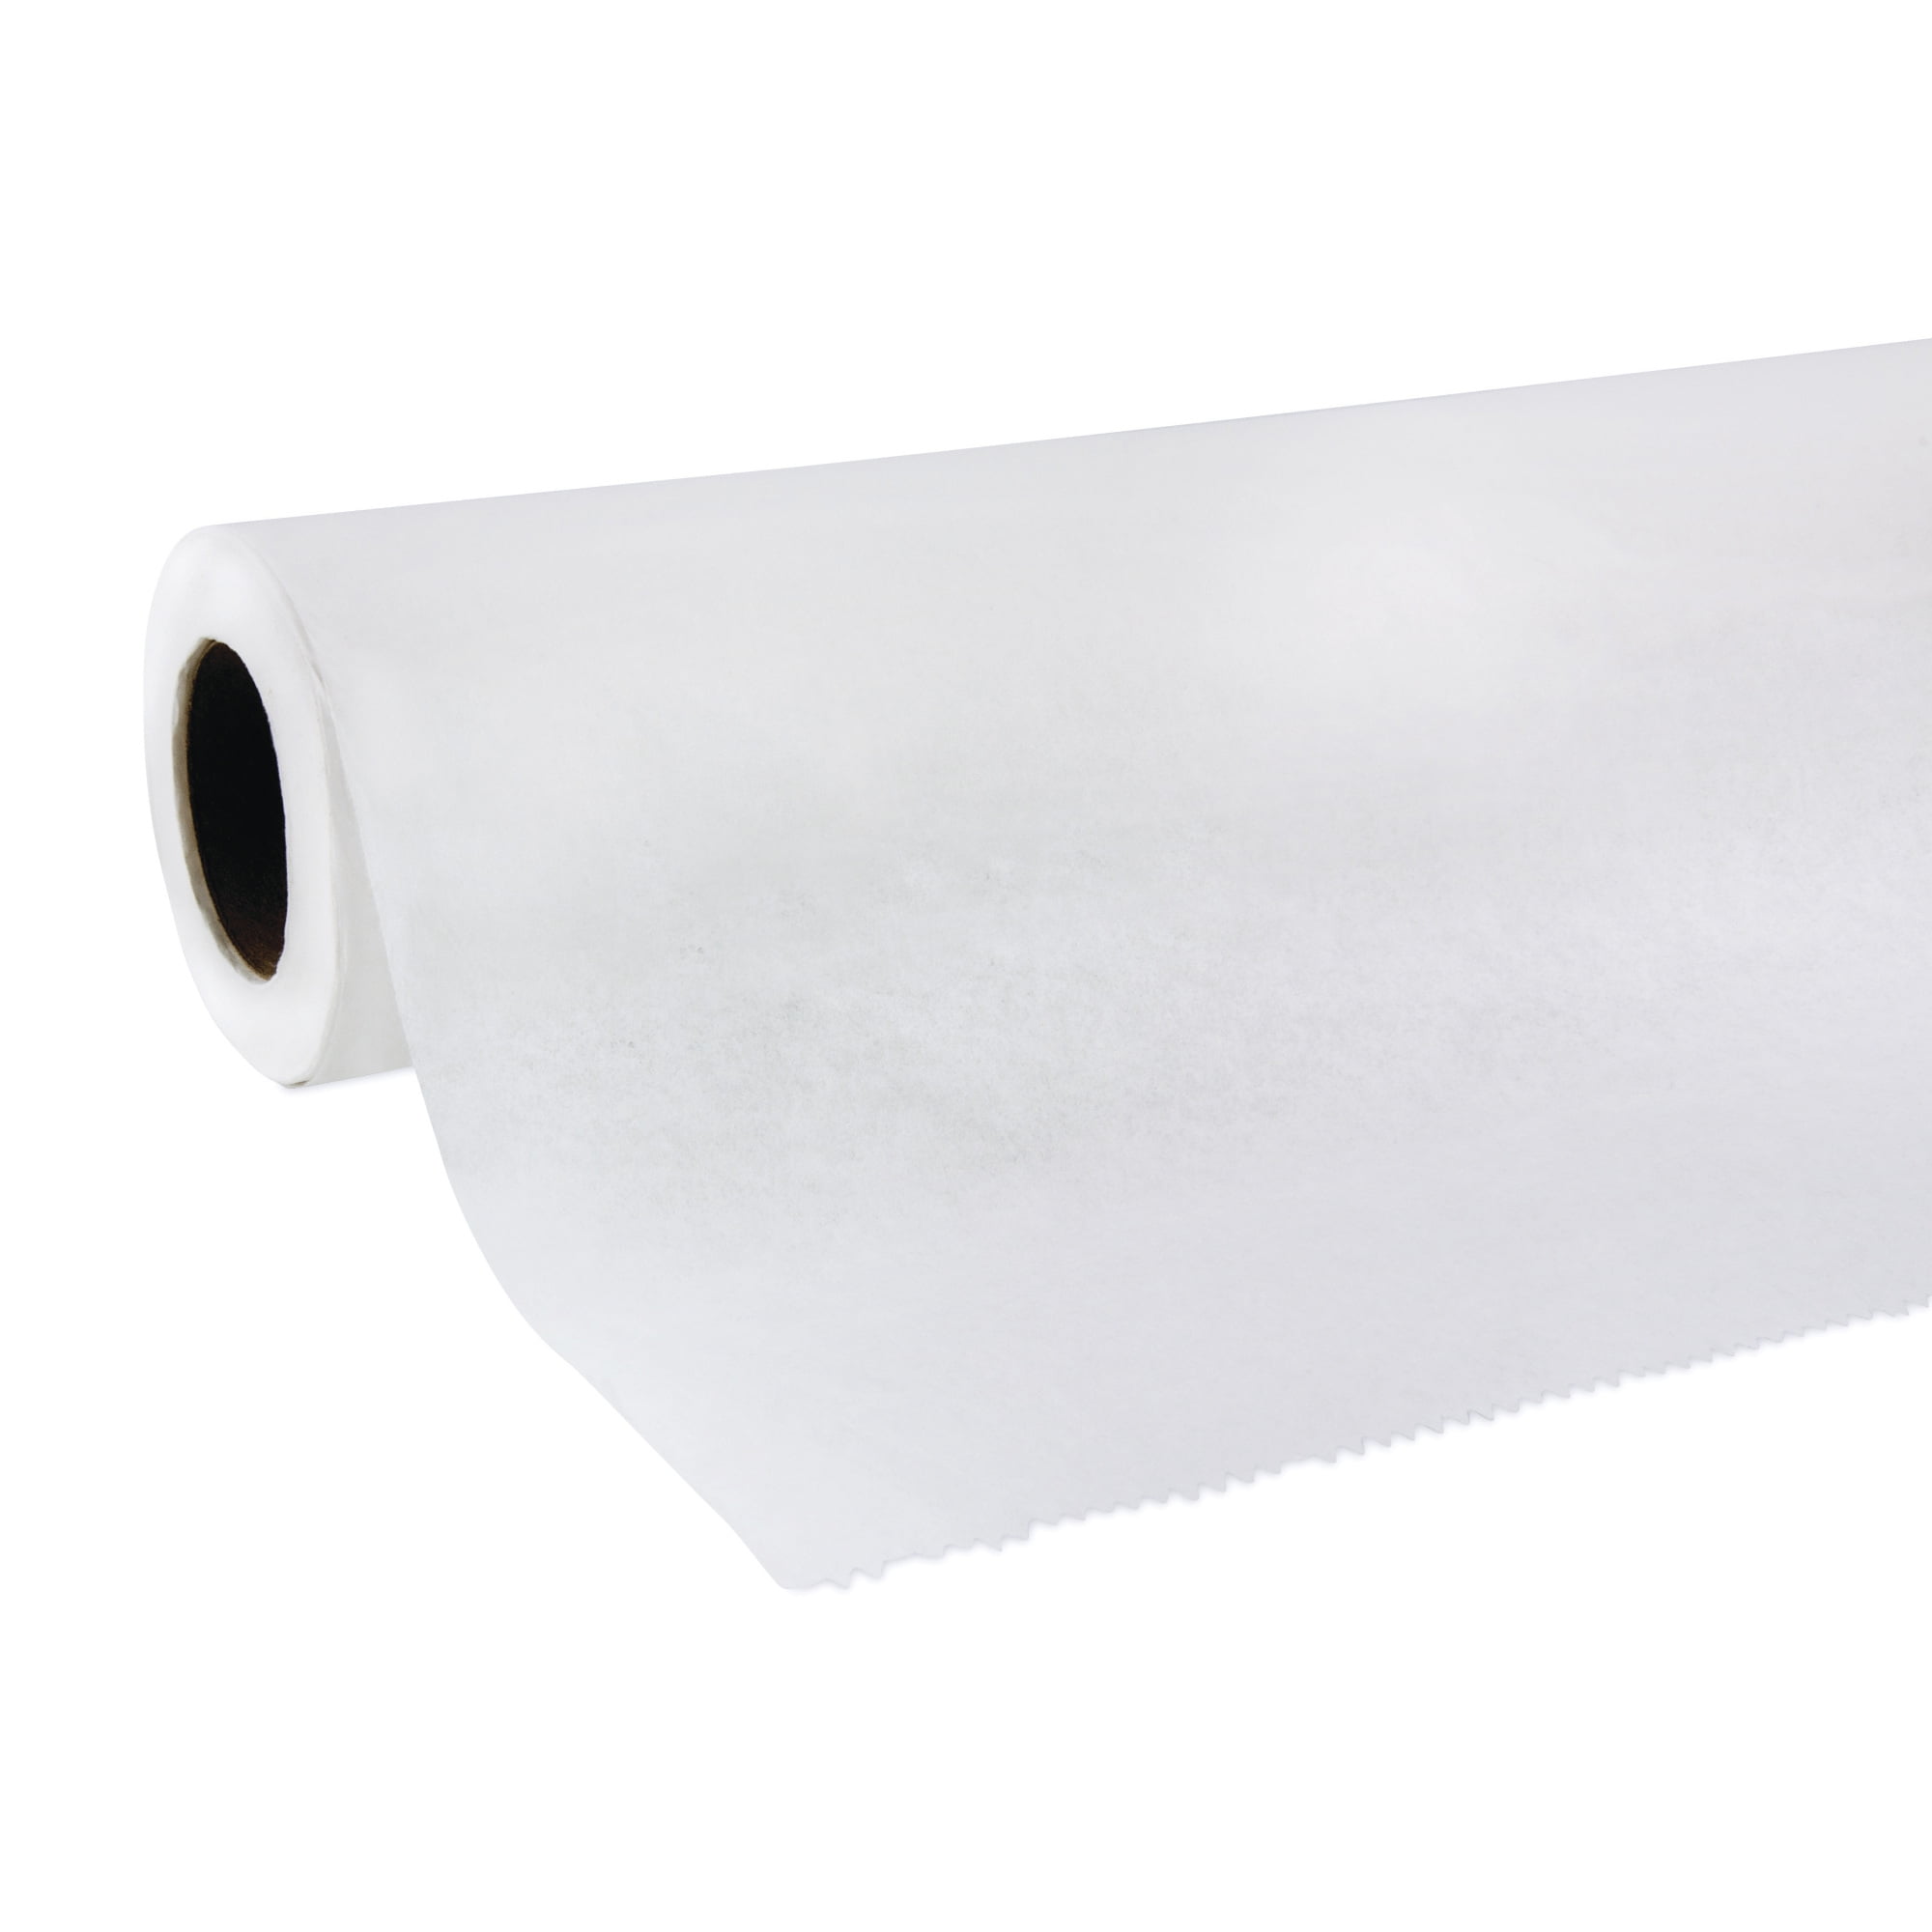 TIDI Choice Exam Table Paper Roll, Smooth Texture, 21 x 225 ft, White, 12/Carton  (32161)